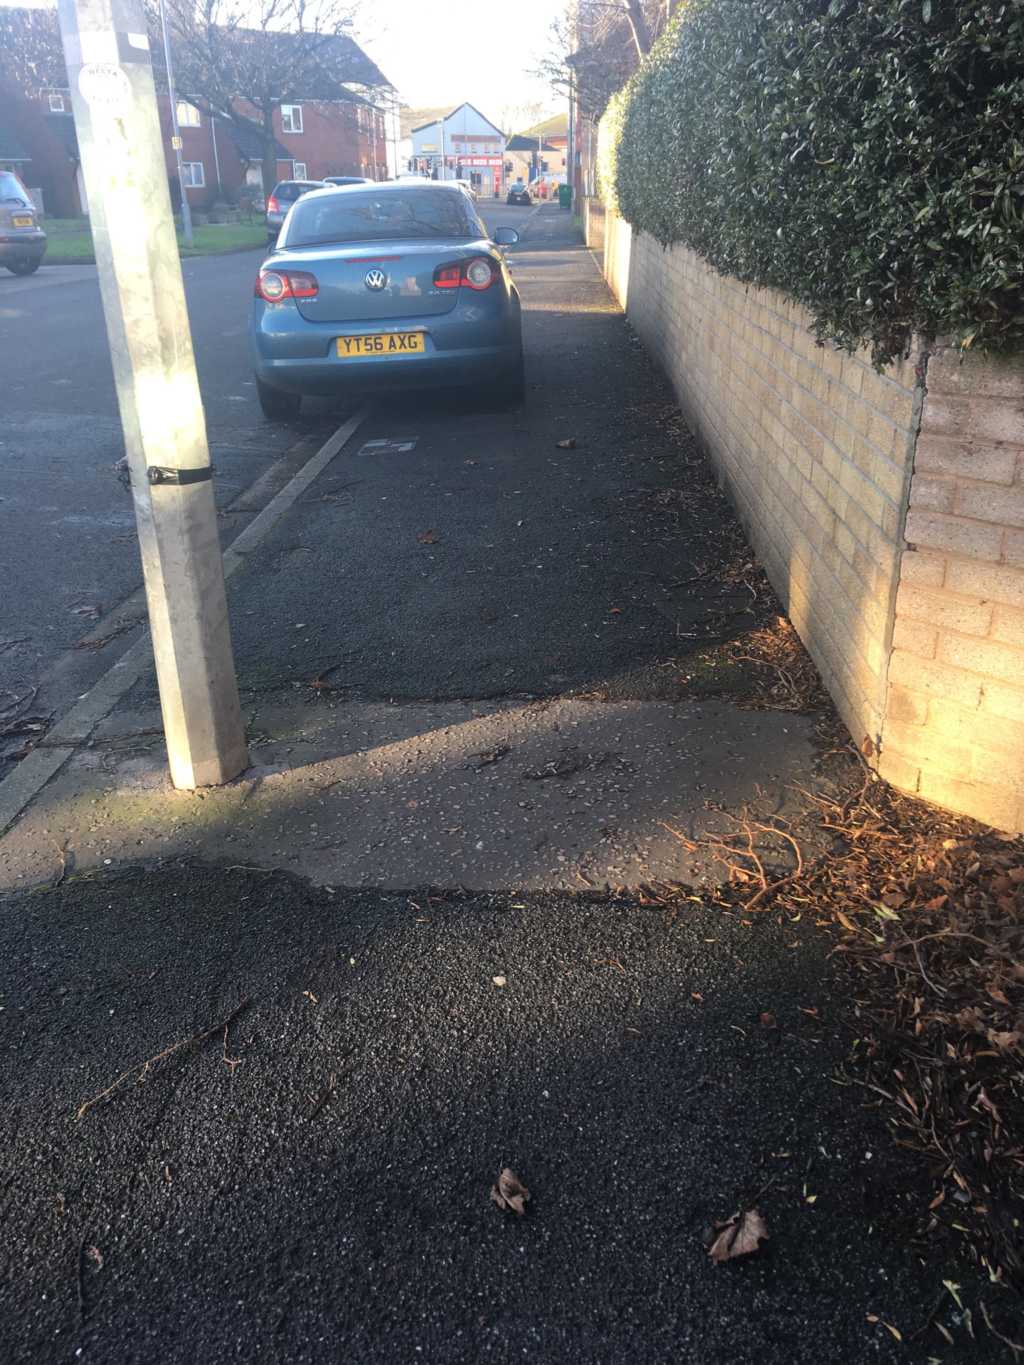 YT56 AXG displaying Inconsiderate Parking